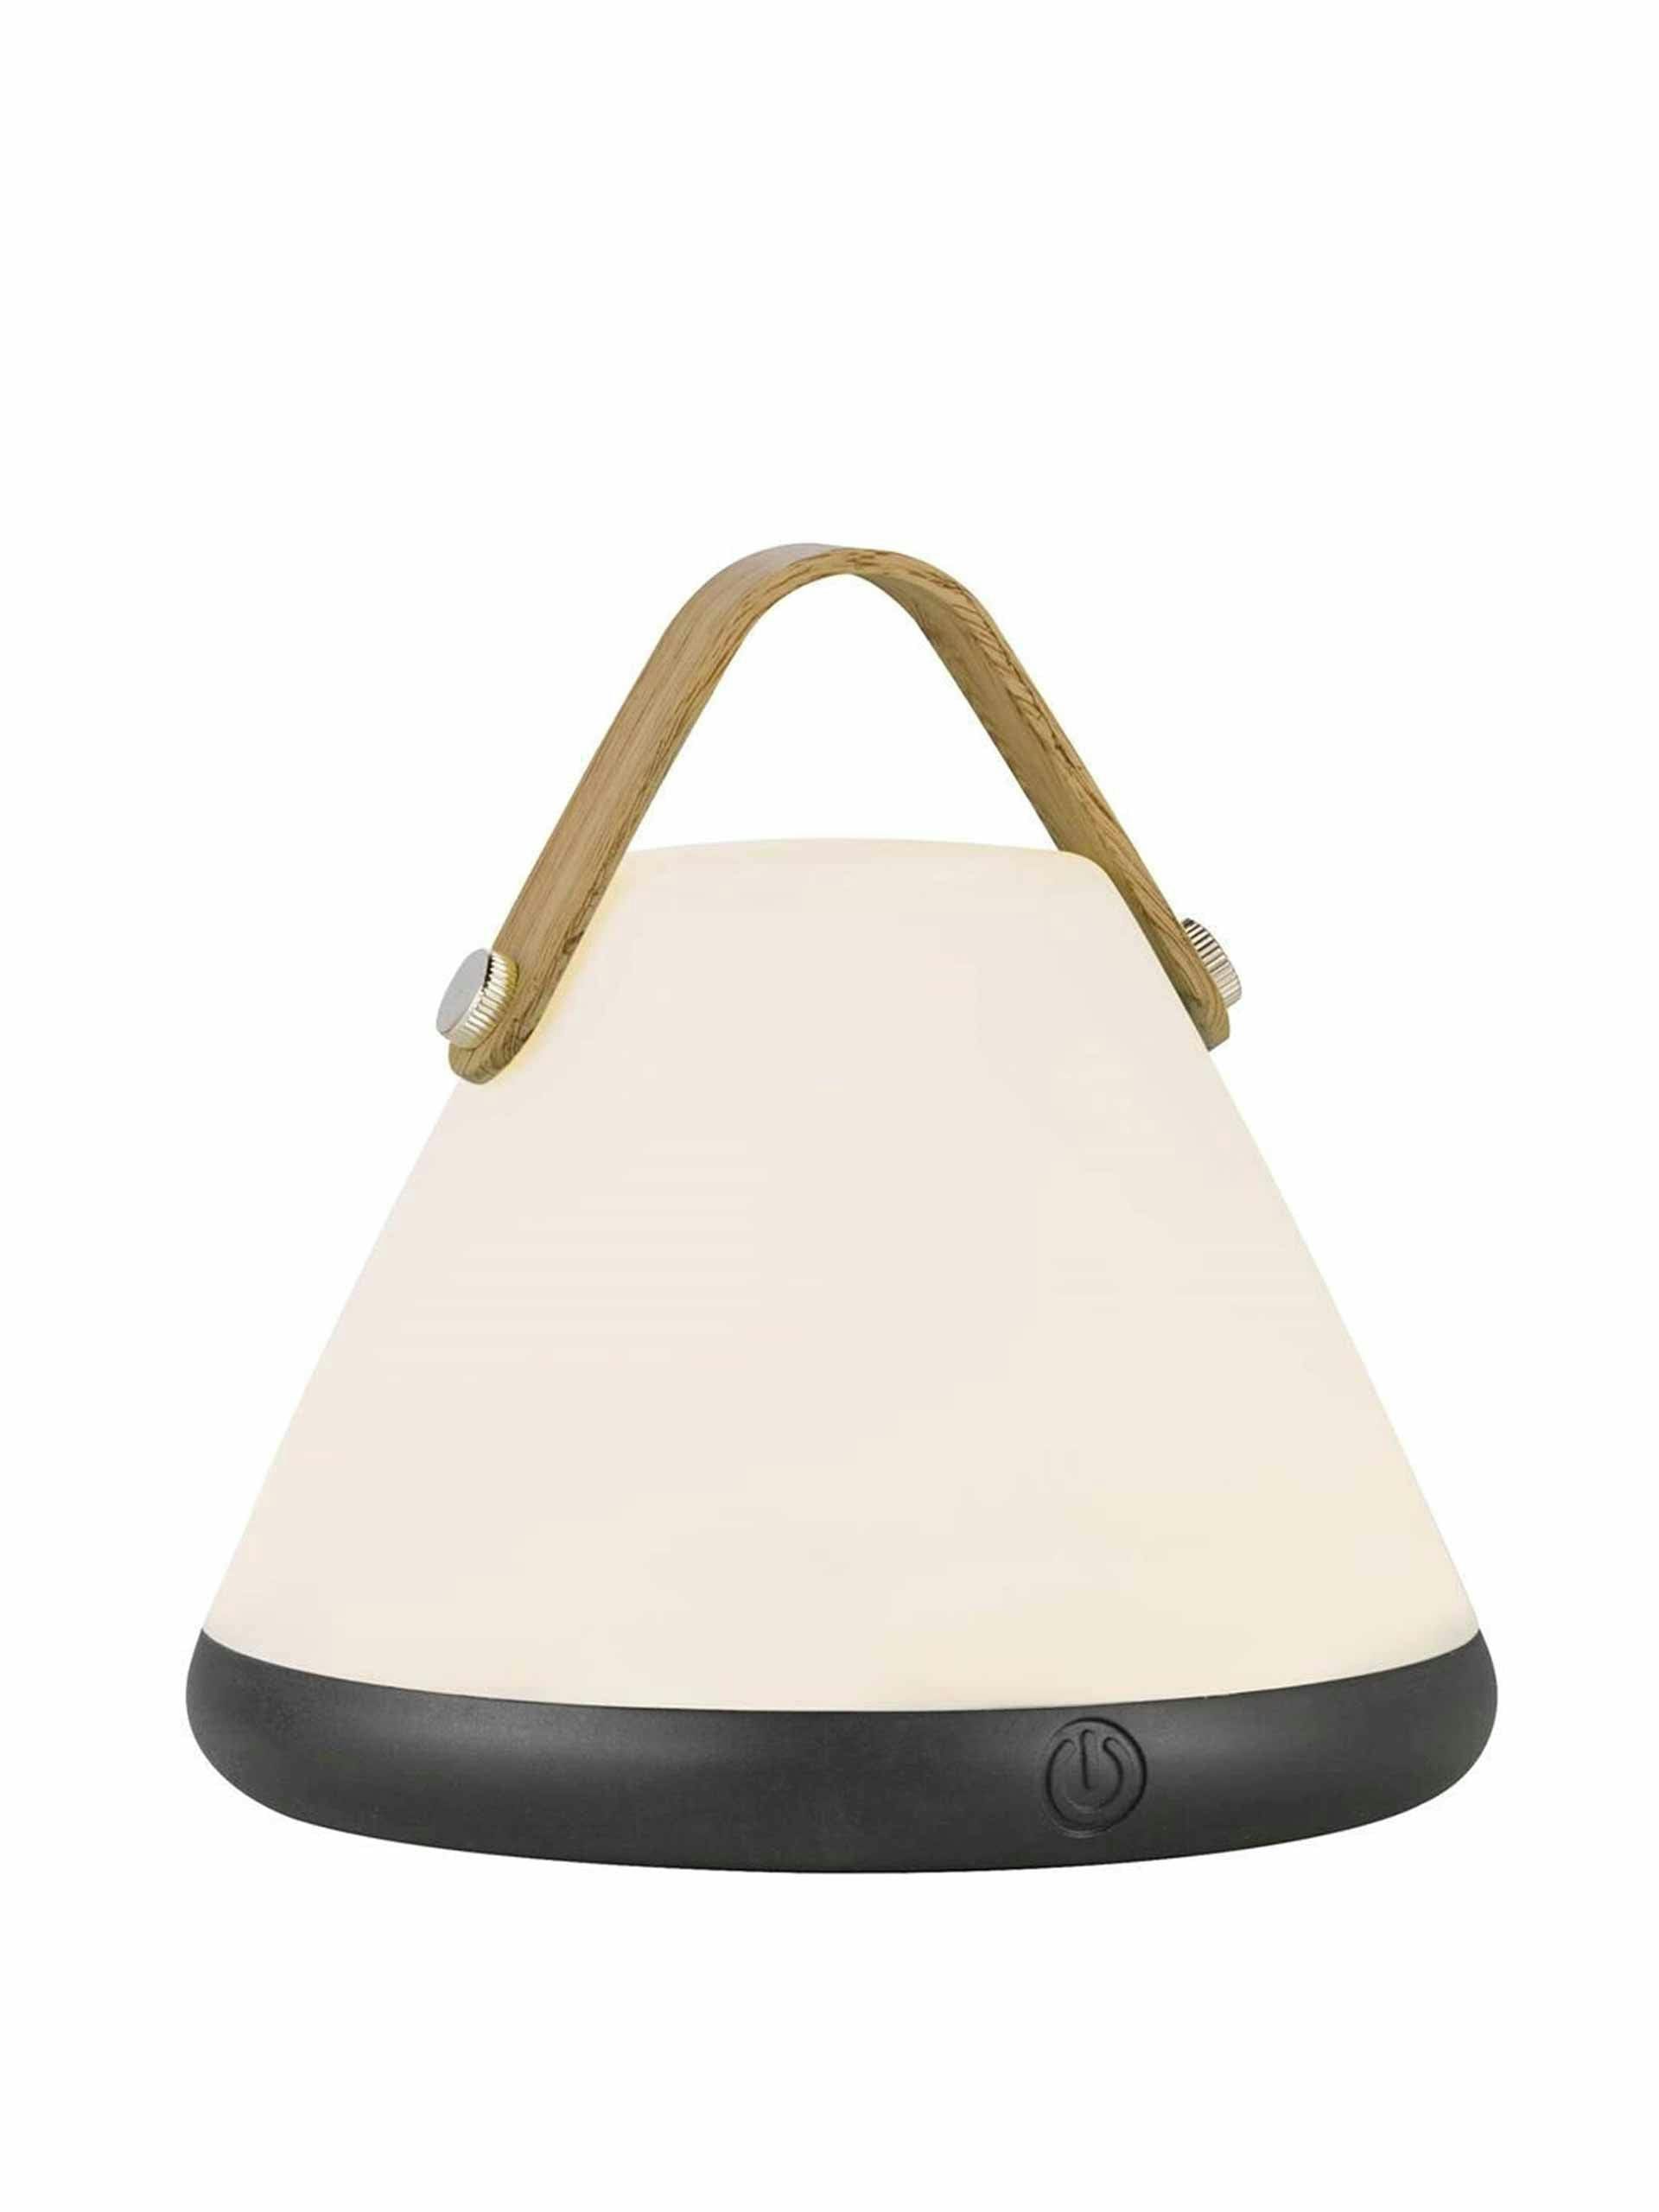 Outdoor lamp with wooden handle